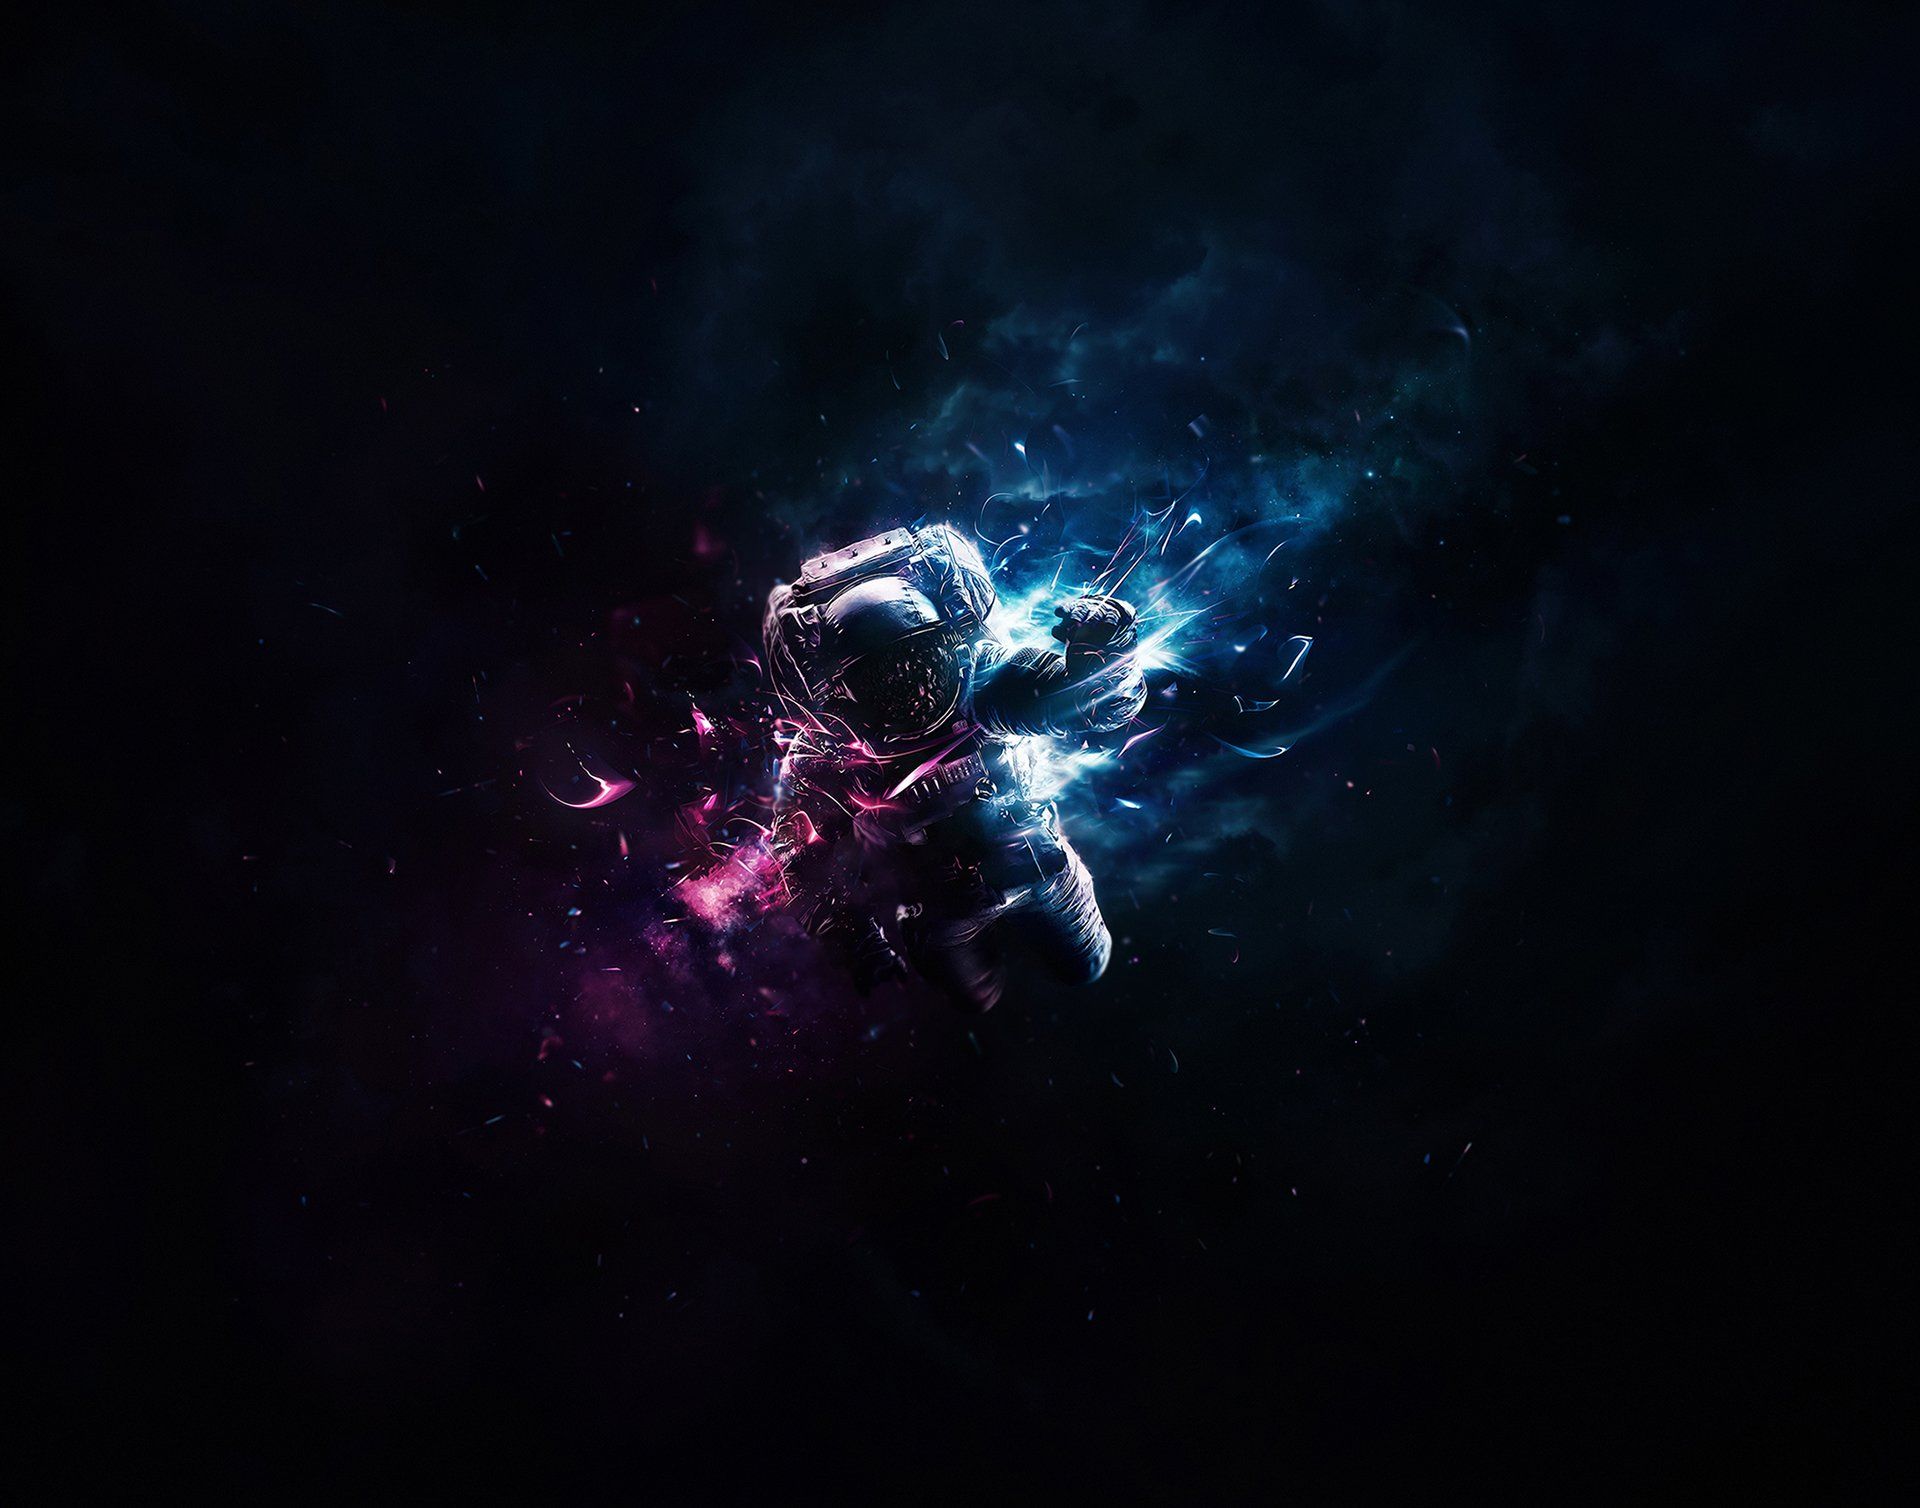 Incredible Space Inspired Photohop Manipulations